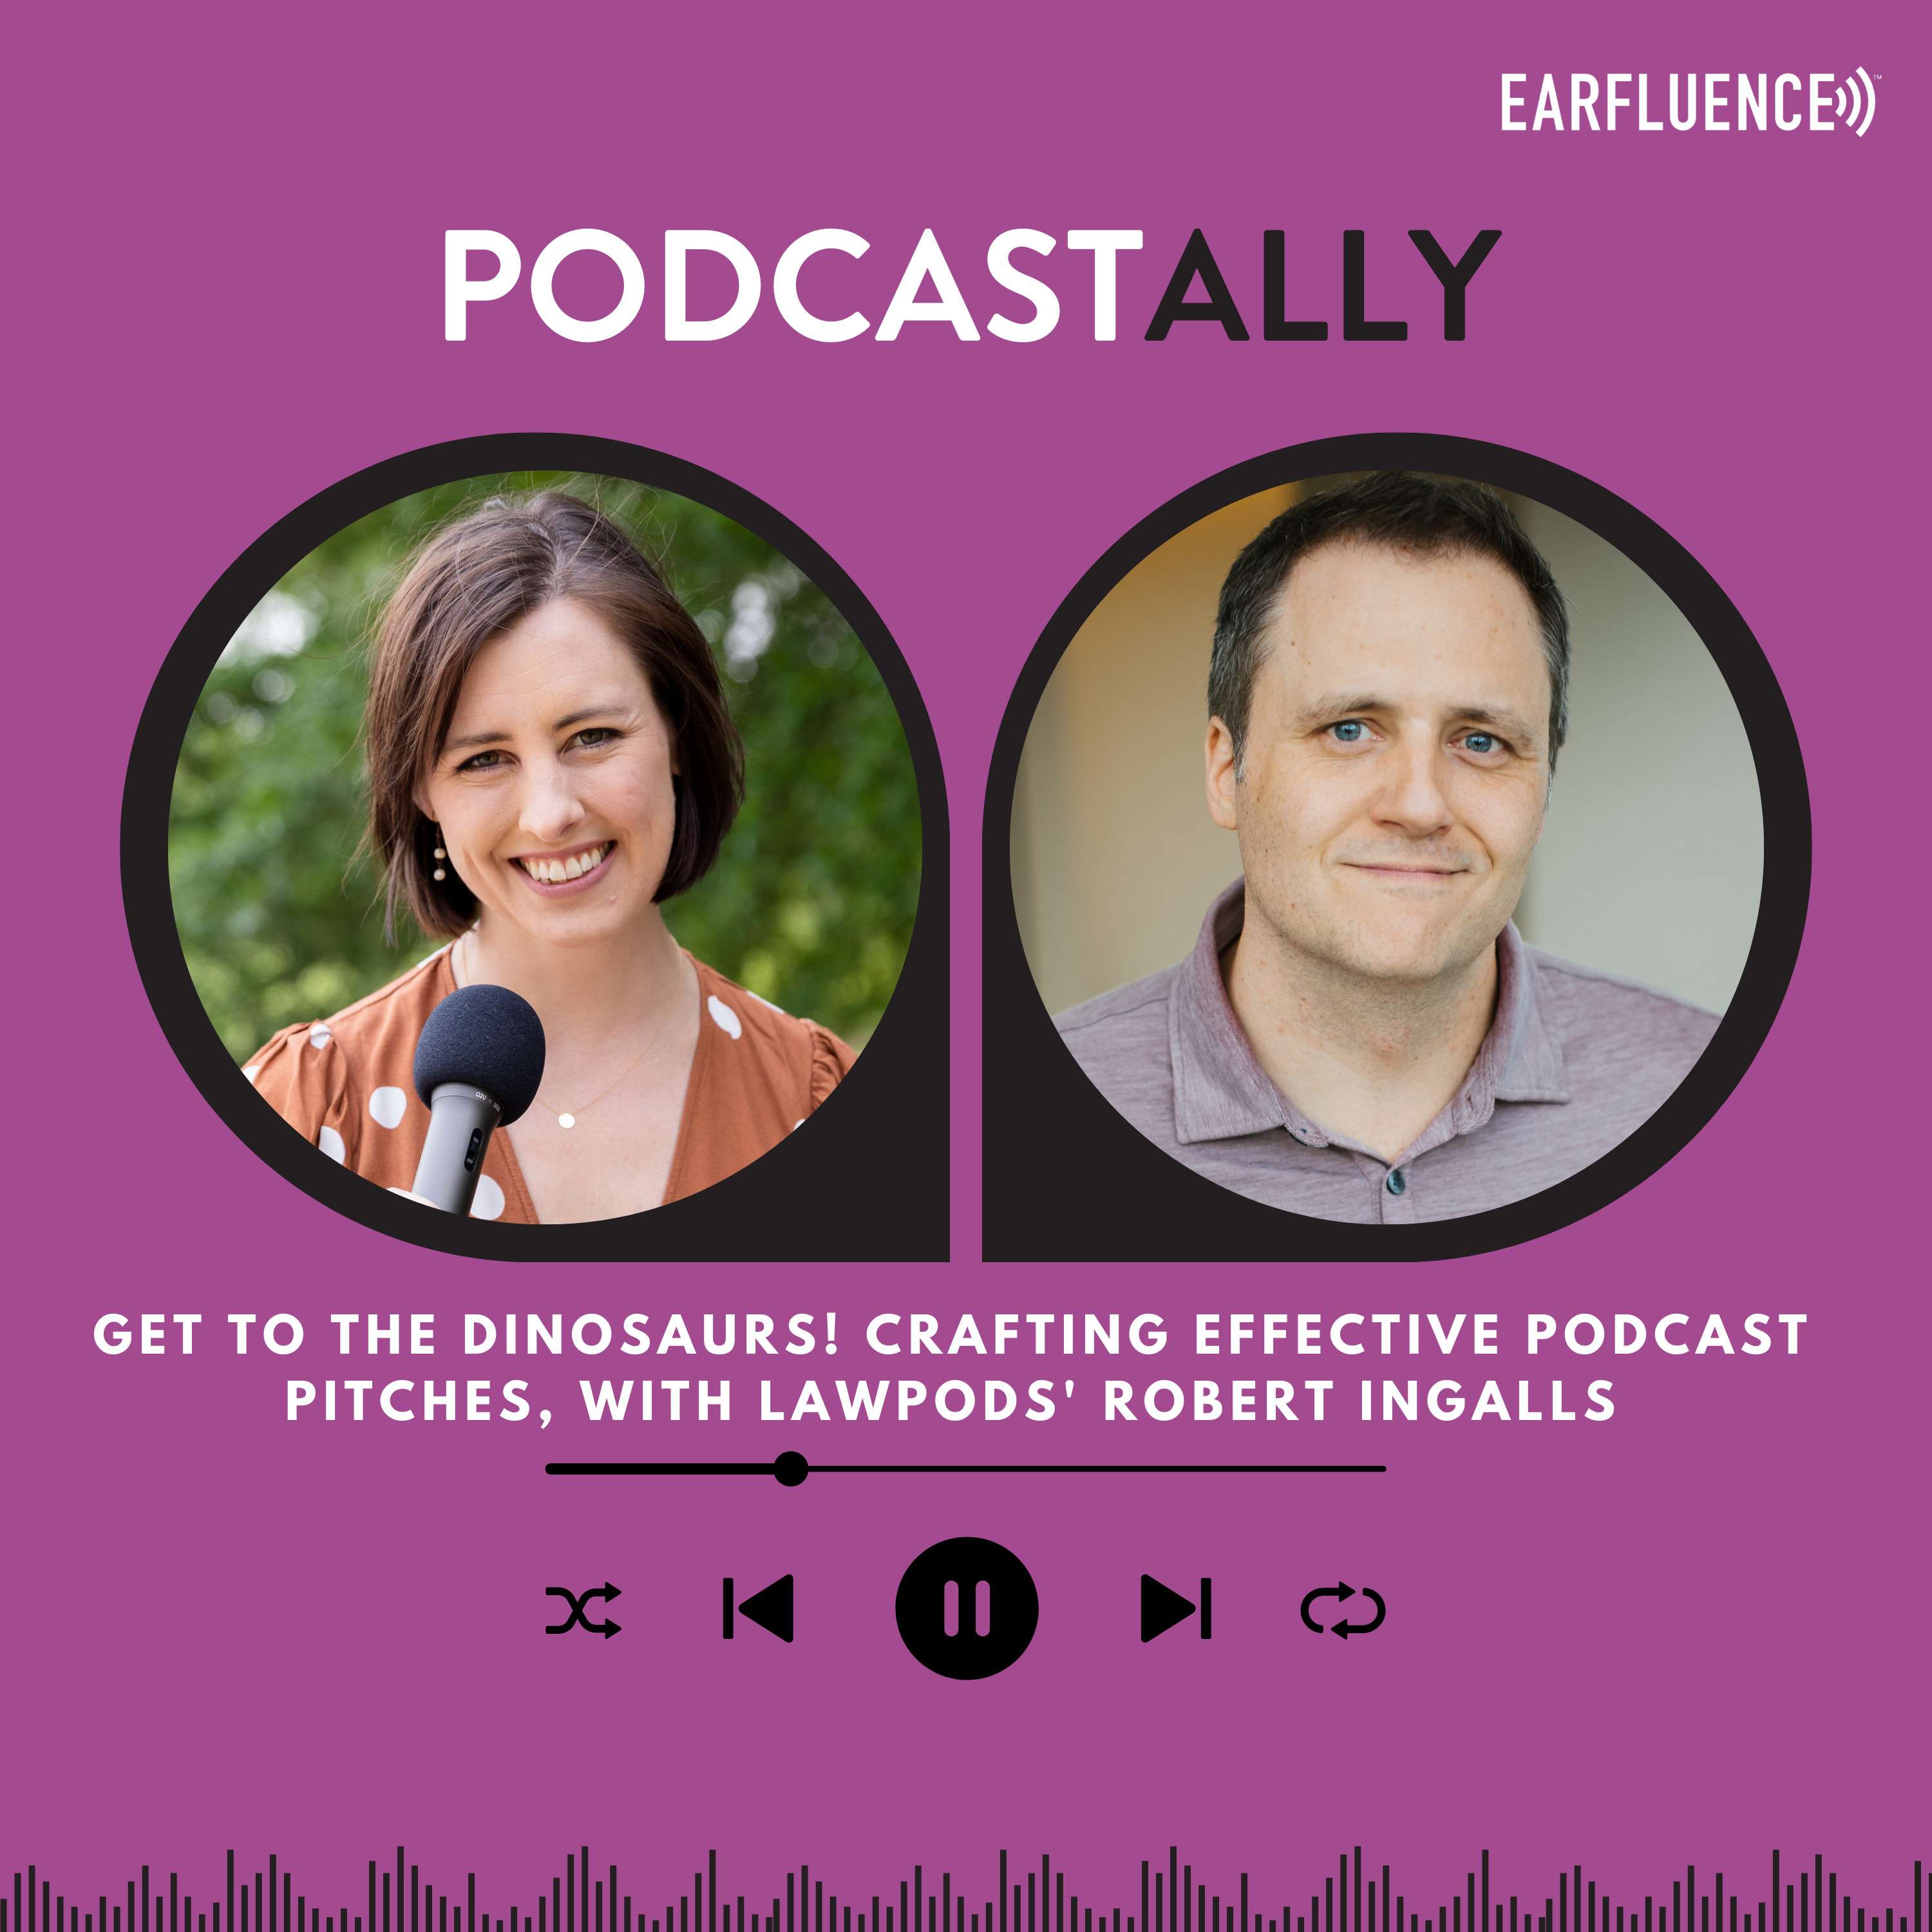 Get to the Dinosaurs! Crafting Effective Podcast Pitches, with LawPods' Robert Ingalls